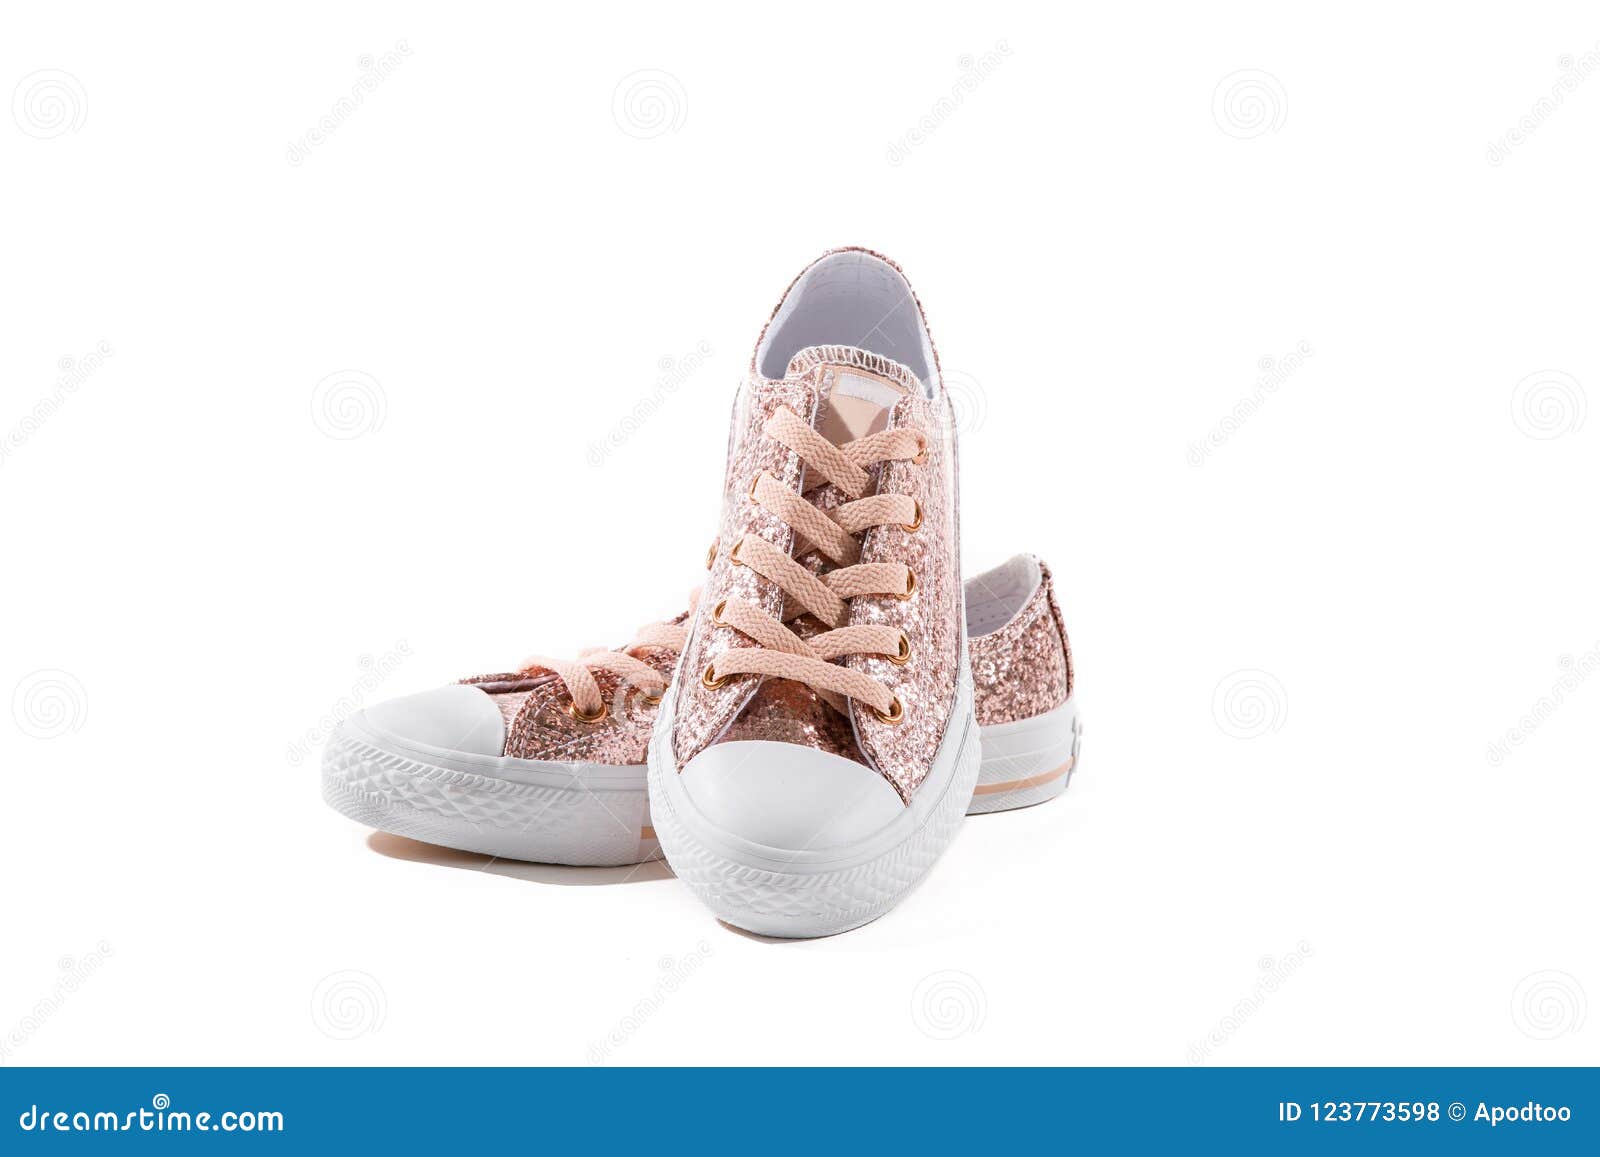 sparkly white tennis shoes